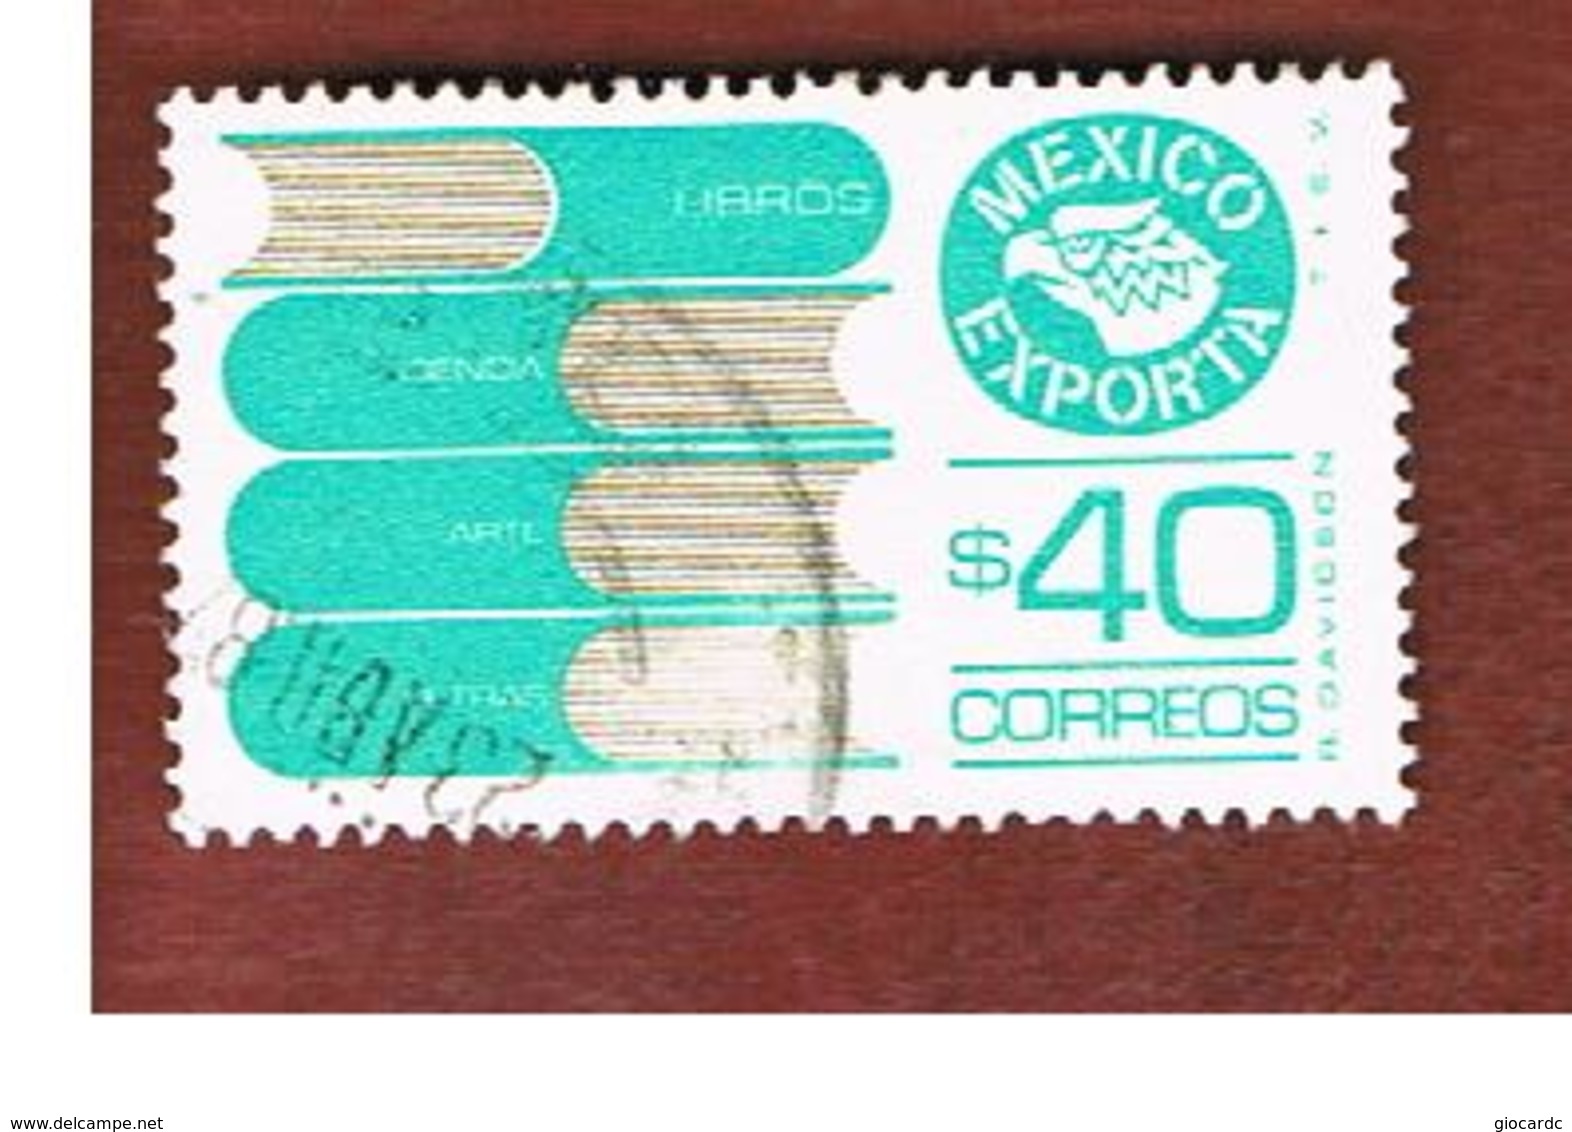 MESSICO (MEXICO) -  SG 1360bl   - 1986    MEXICAN EXPORTS:   BOOKS          -  USED° - Messico